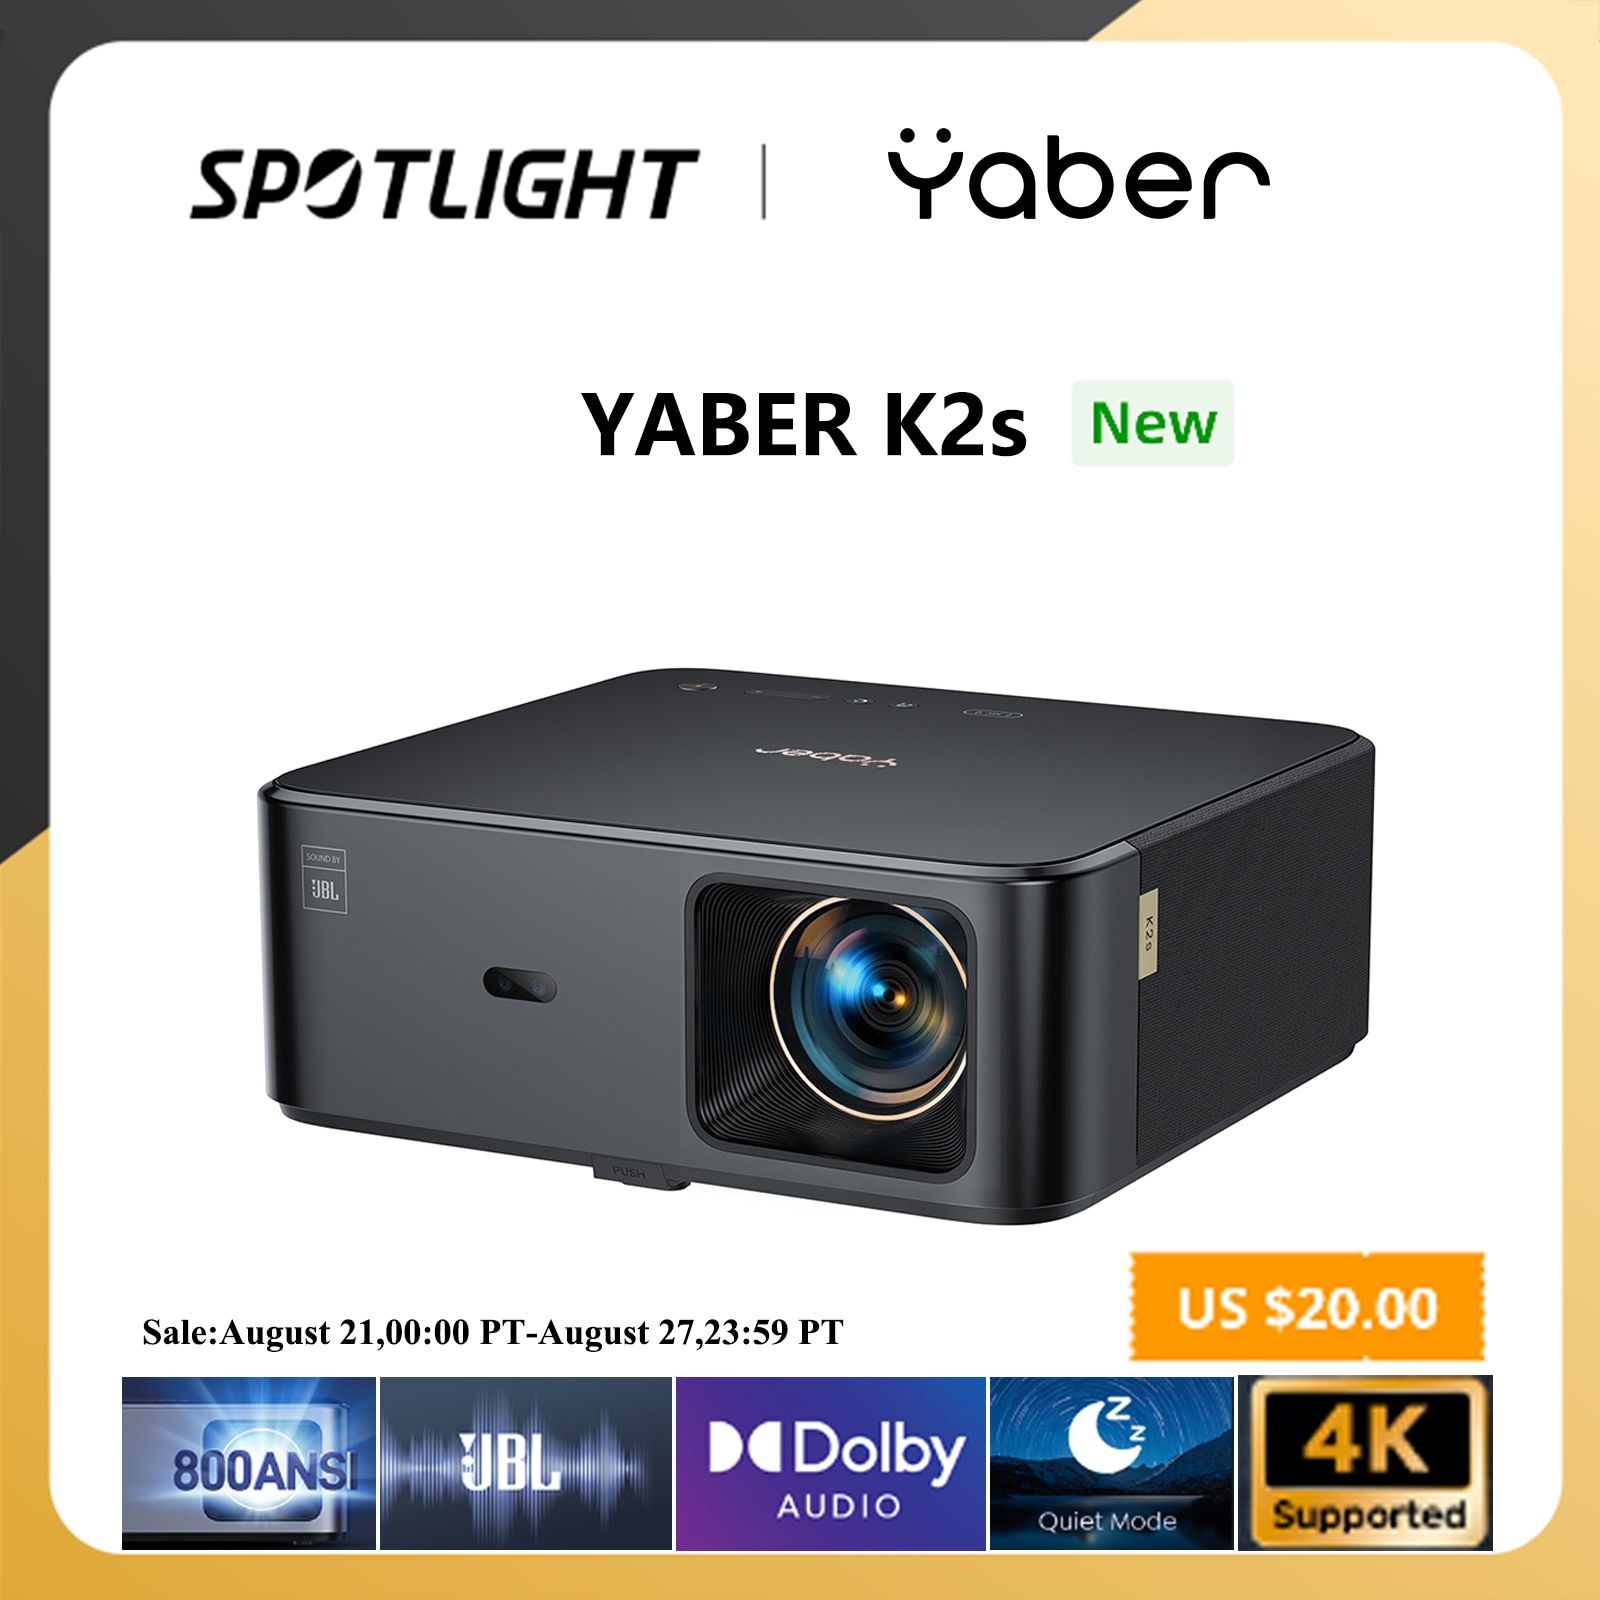 Projector 4K with Android TV, YABER K2s 800 ANSI WiFi 6 Bluetooth  Projector, Sound by JBL, Dolby Audio, Auto Focus & Keystone, Native 1080P  4K